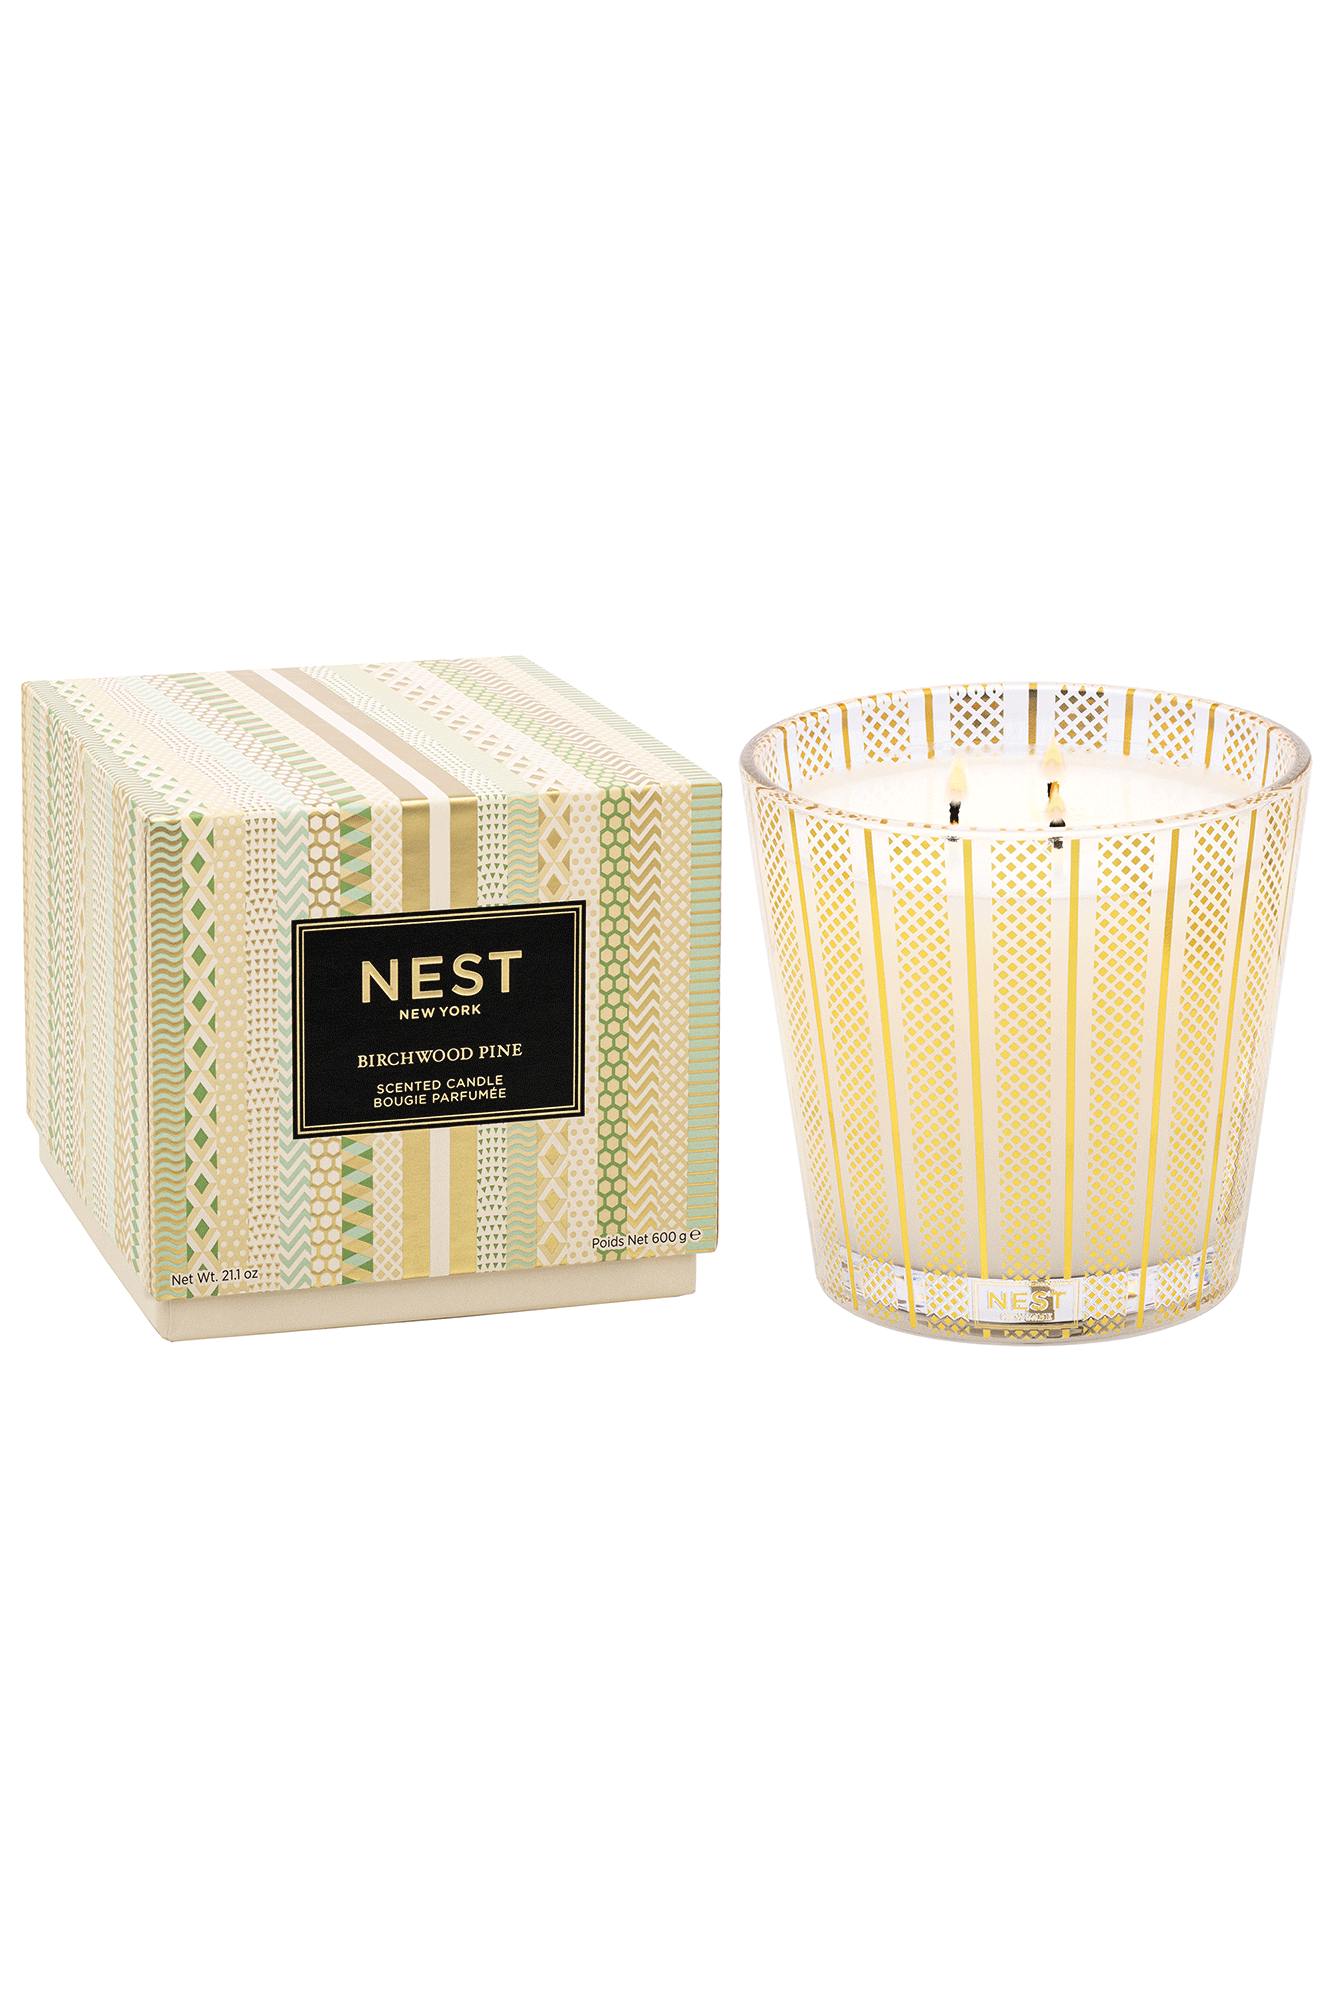 Bring the fresh scent of a winter forest into your home with our Birchwood & Pine 3 Wick Candle from Nest. This bestselling fragrance is crafted from a blend of white pine, fir balsam, and birchwood, layered over a warm base of amber and musk. Refresh your home and relax in the inviting aroma of nature.